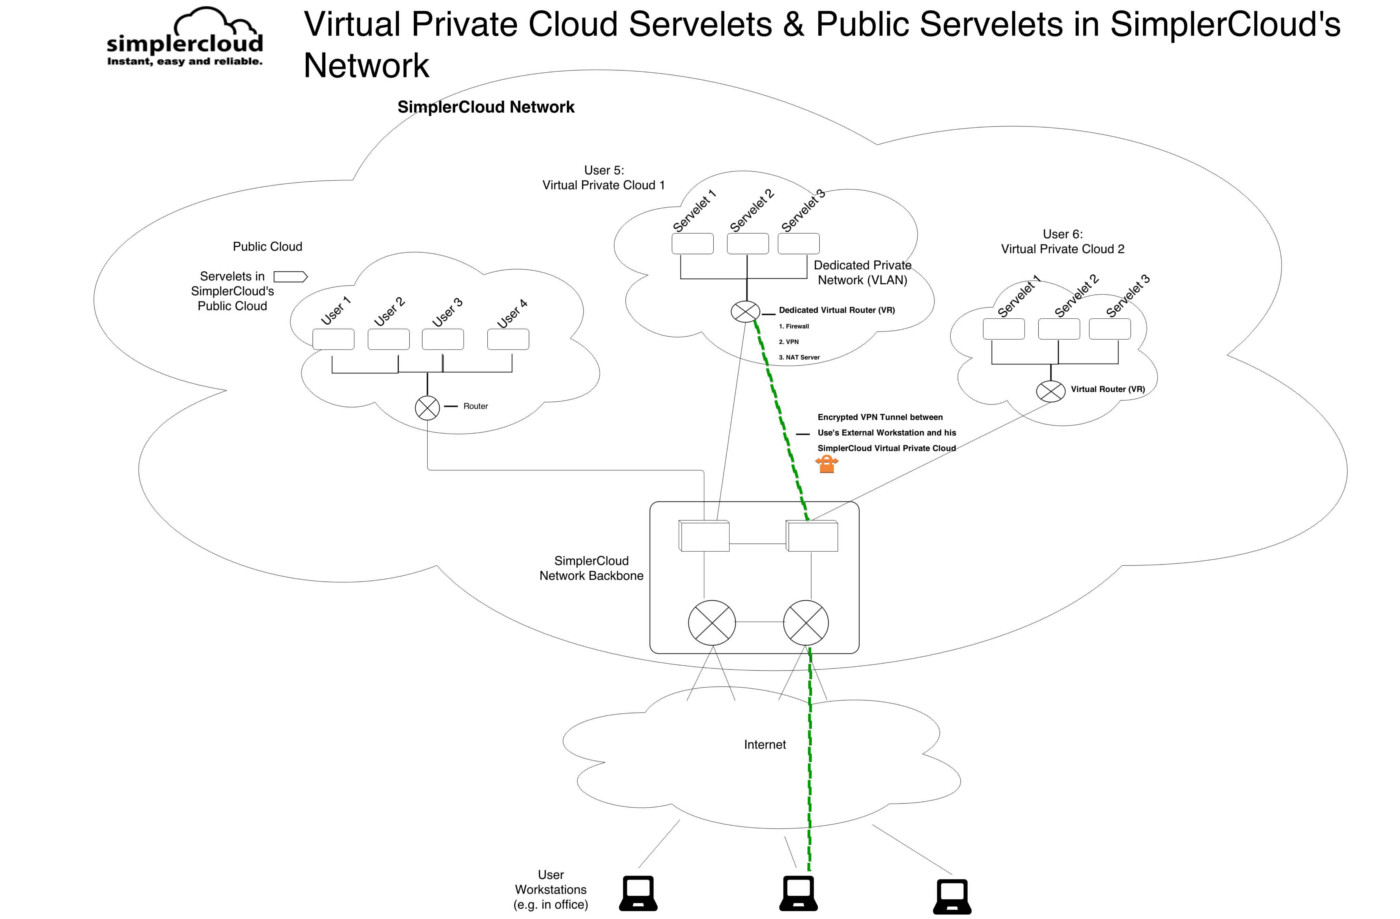 How Virtual Private Clouds work in SimplerCloud Network